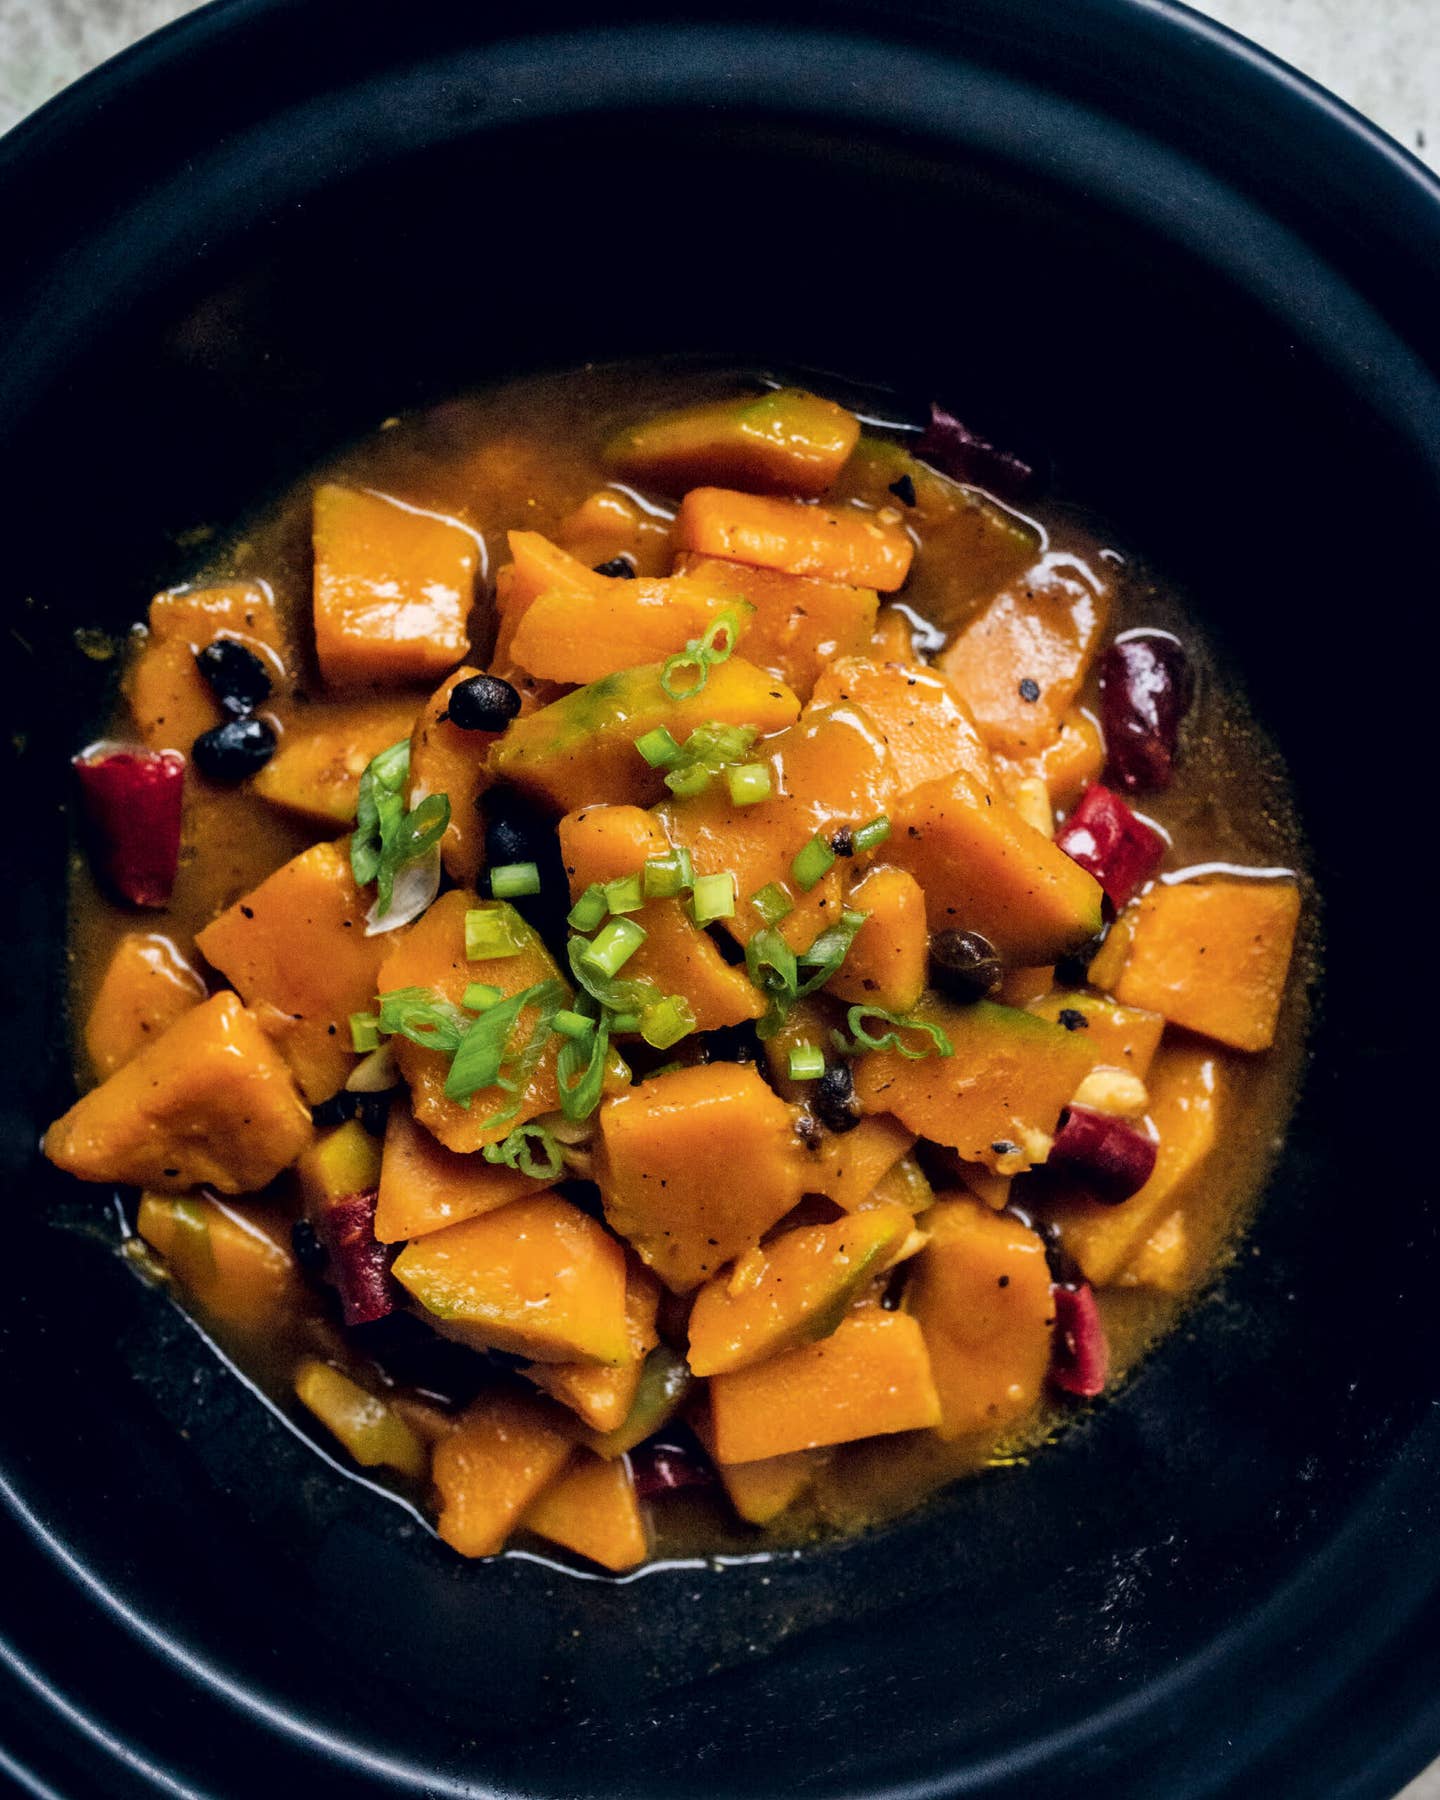 Braised Winter Squash with Fermented Black Beans